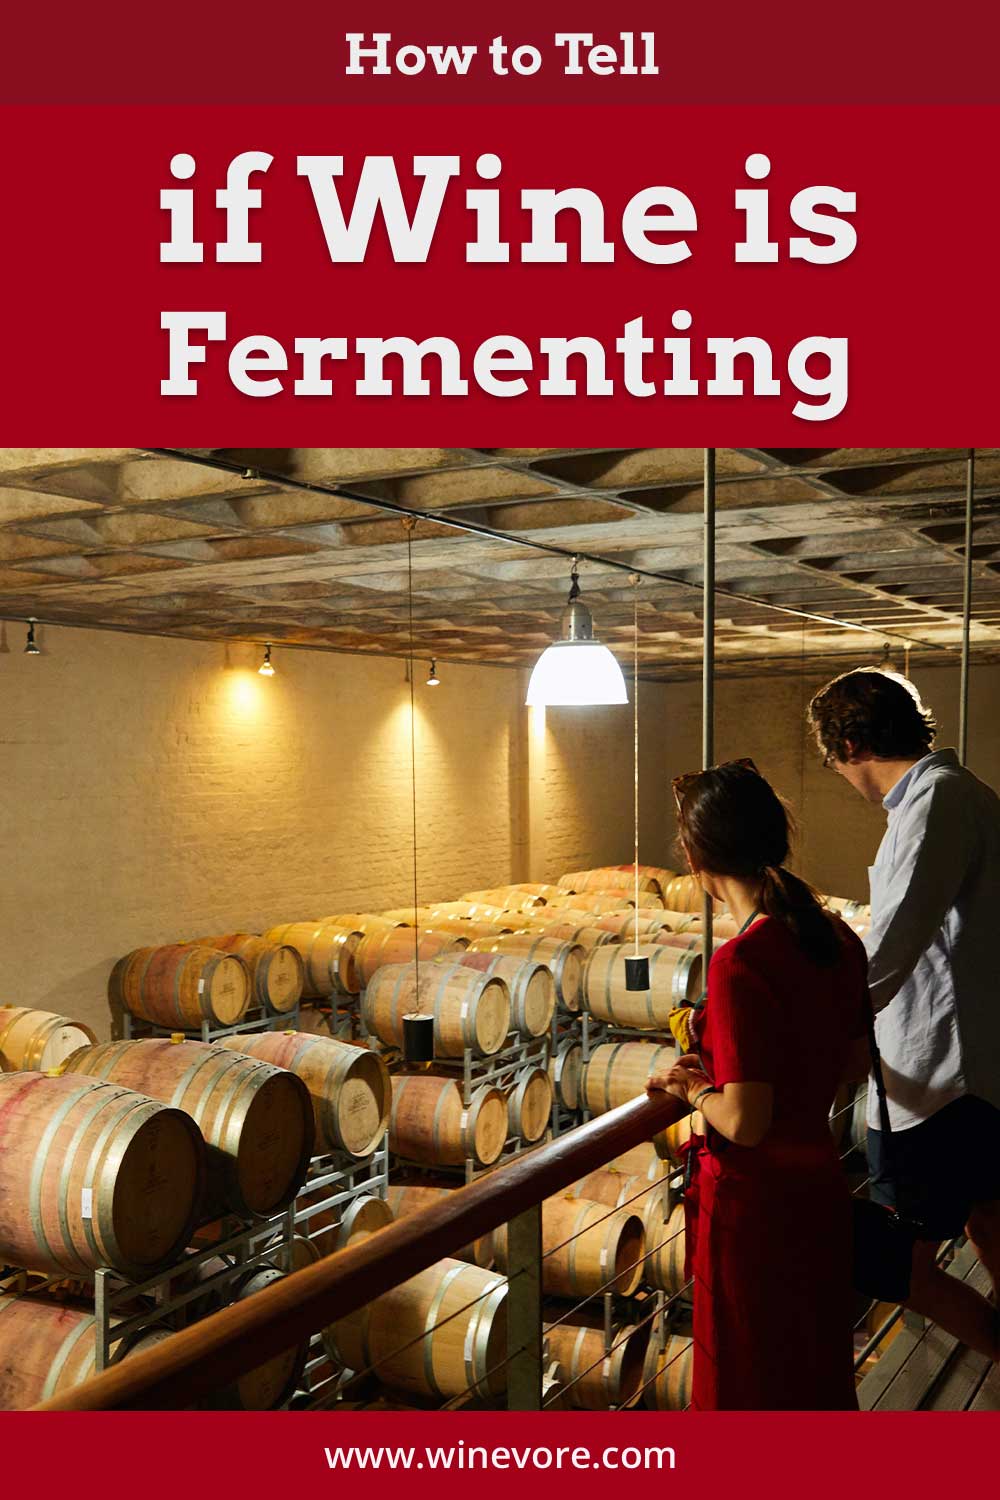 Man and woman looking at barrels of wine - How to Tell if Wine is Fermenting?